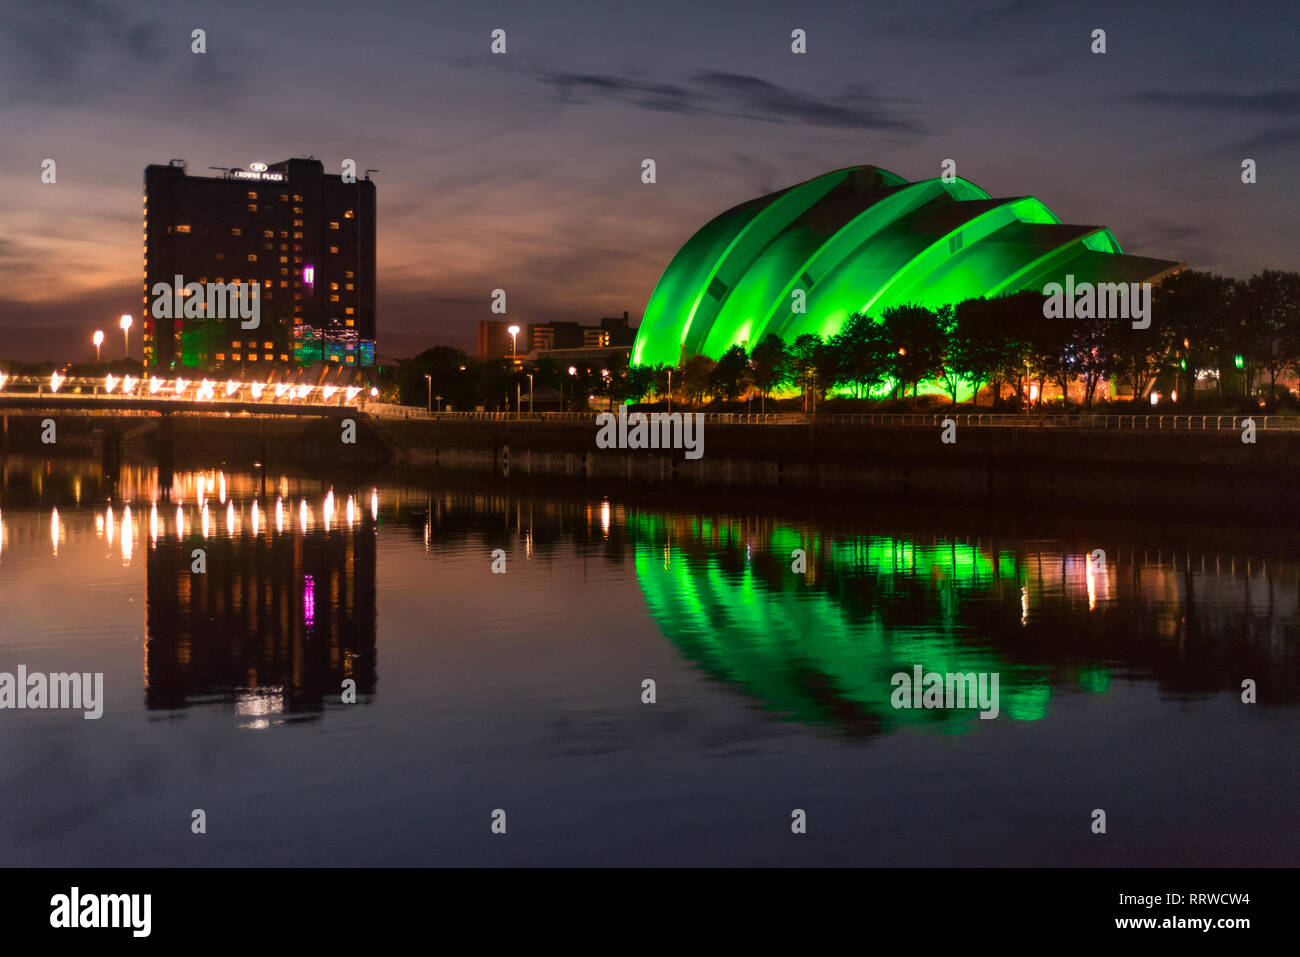 Glasgow/Scotland - September 20 2016: View of the SEC Armadillo lit up in green, reflected in the Clyde River Stock Photo